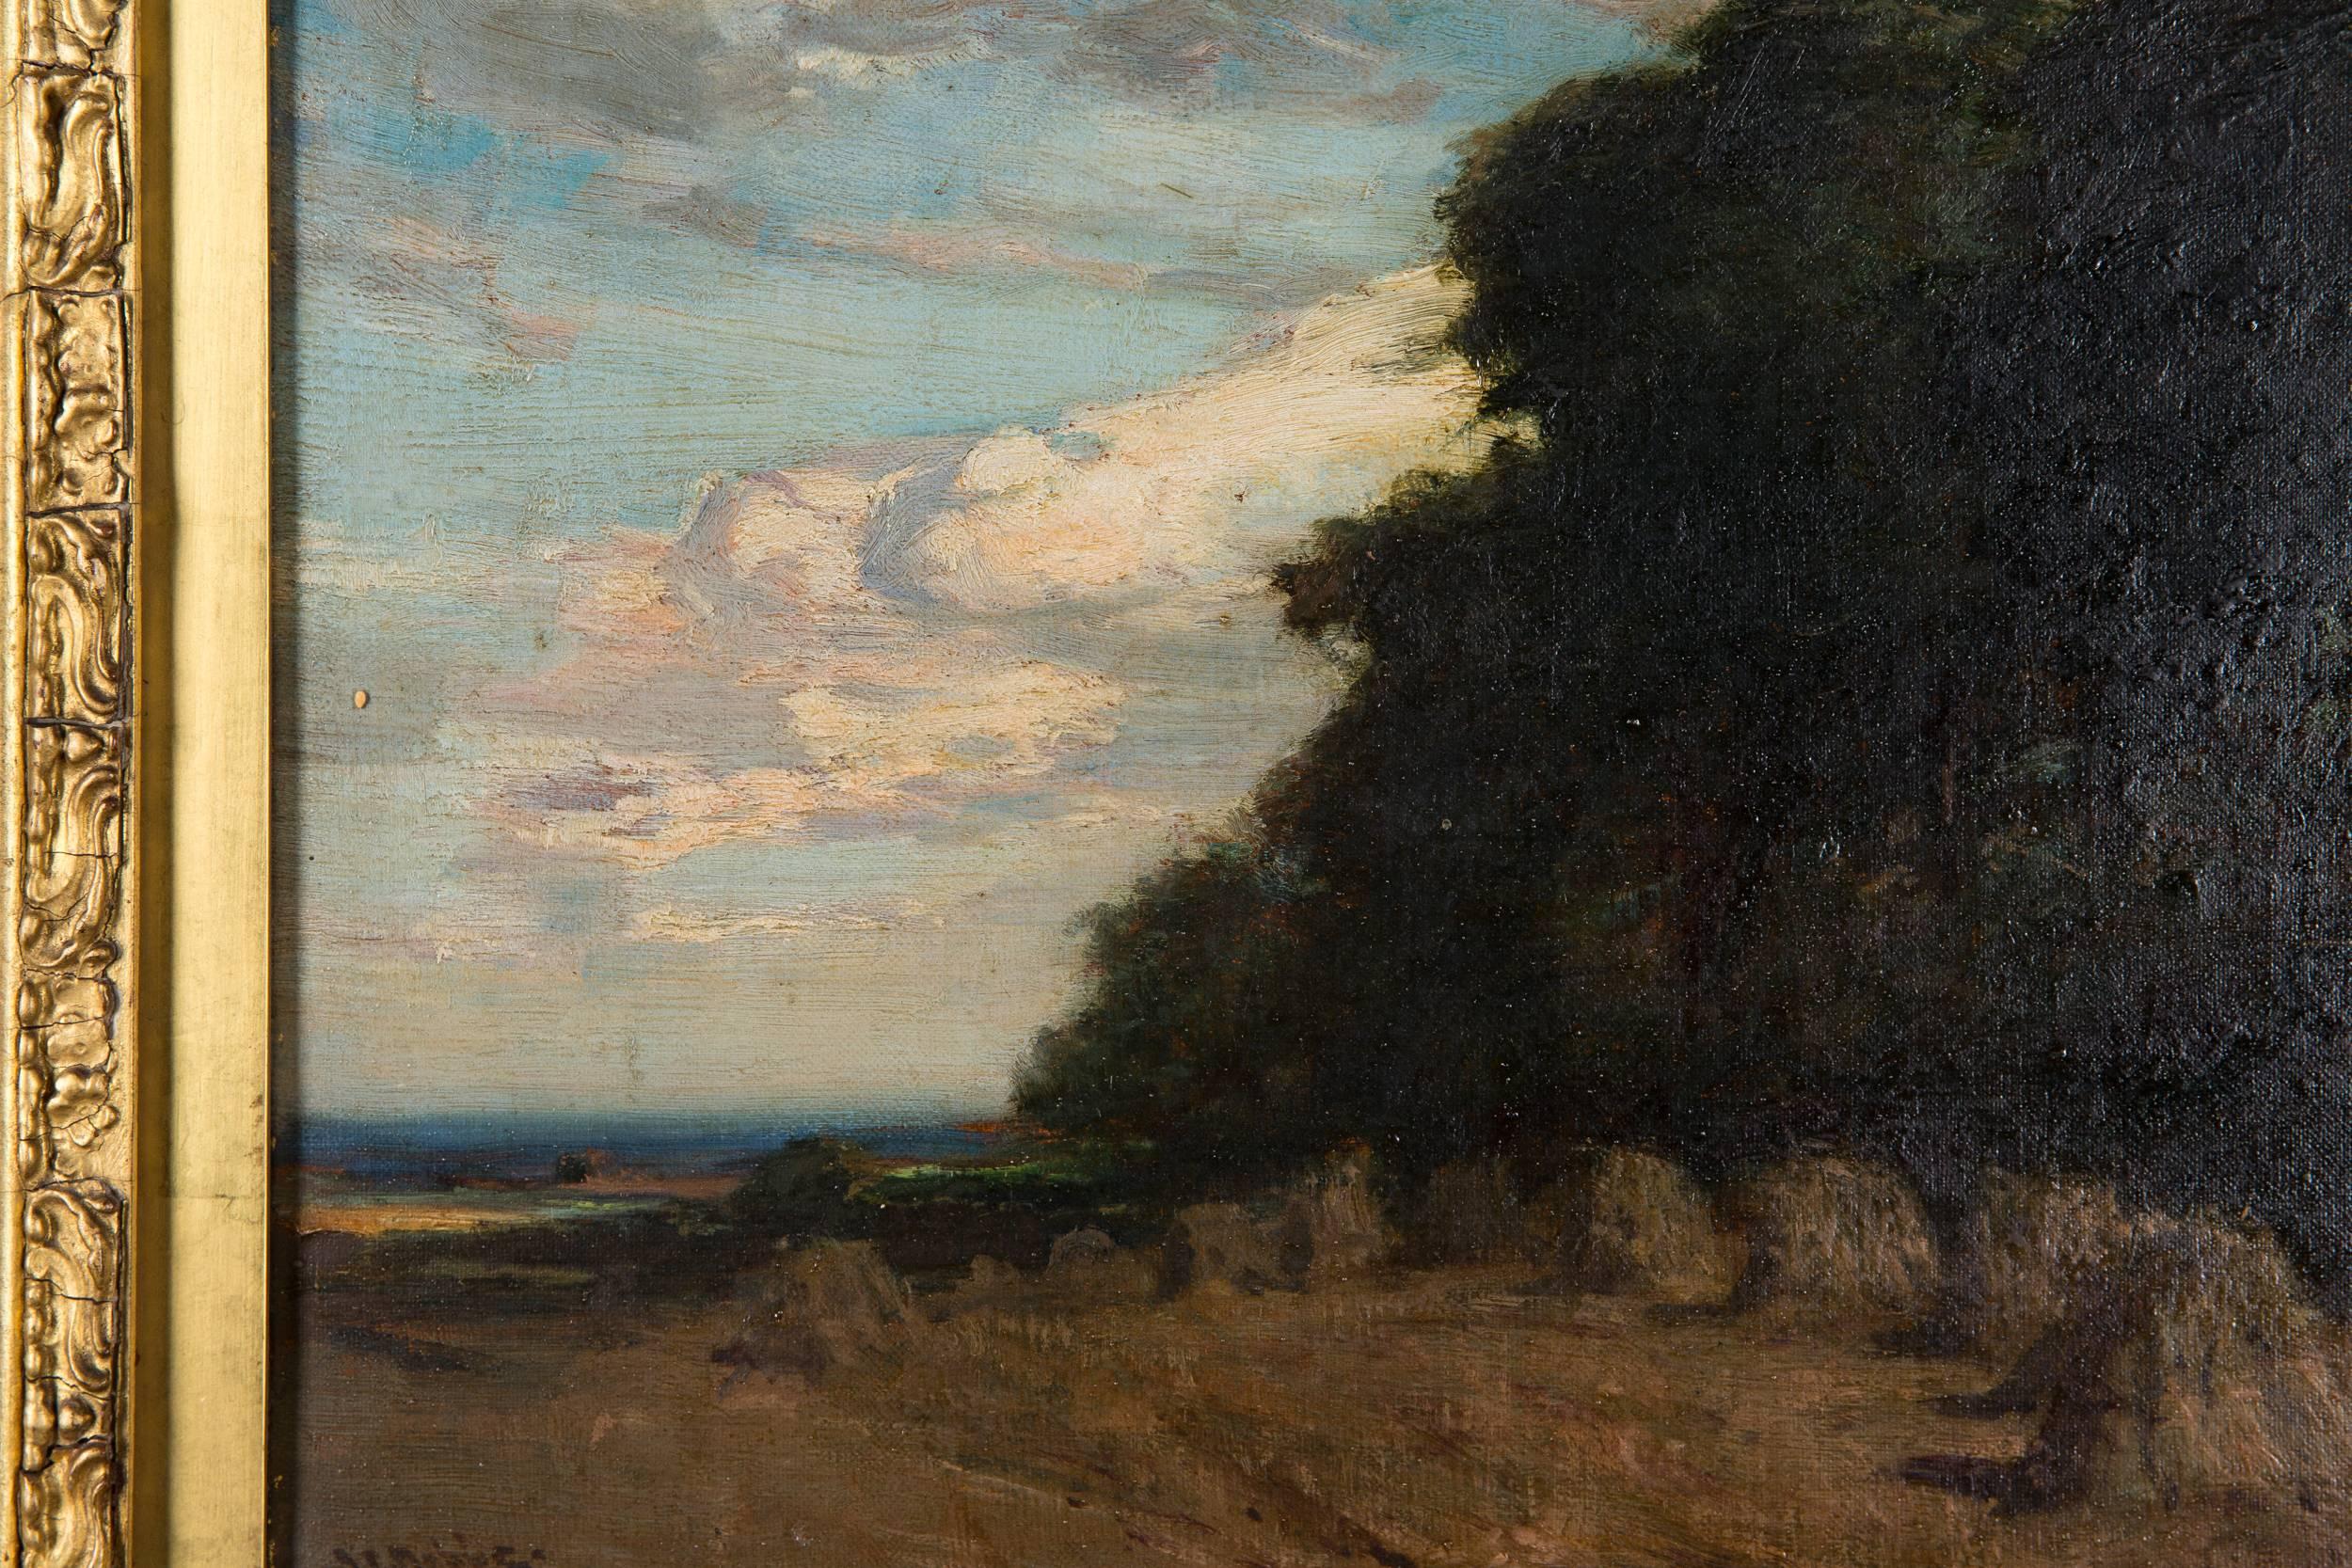 Unknown Original Oil Painting Landscape by James Campbell, 1846-1913